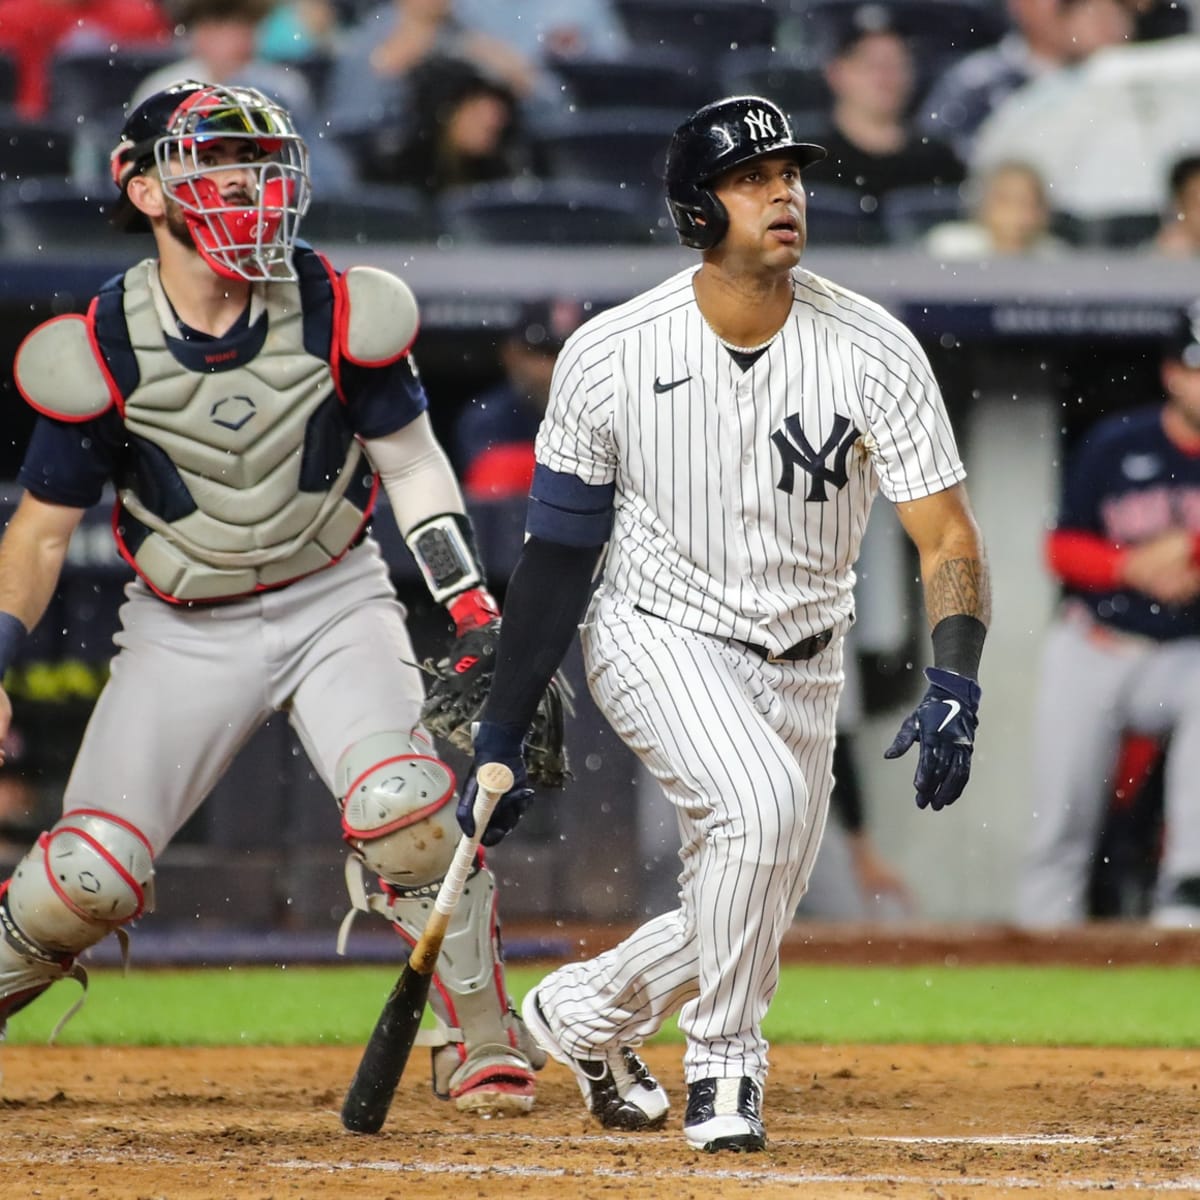 The Yankees might have to do something about Aaron Hicks